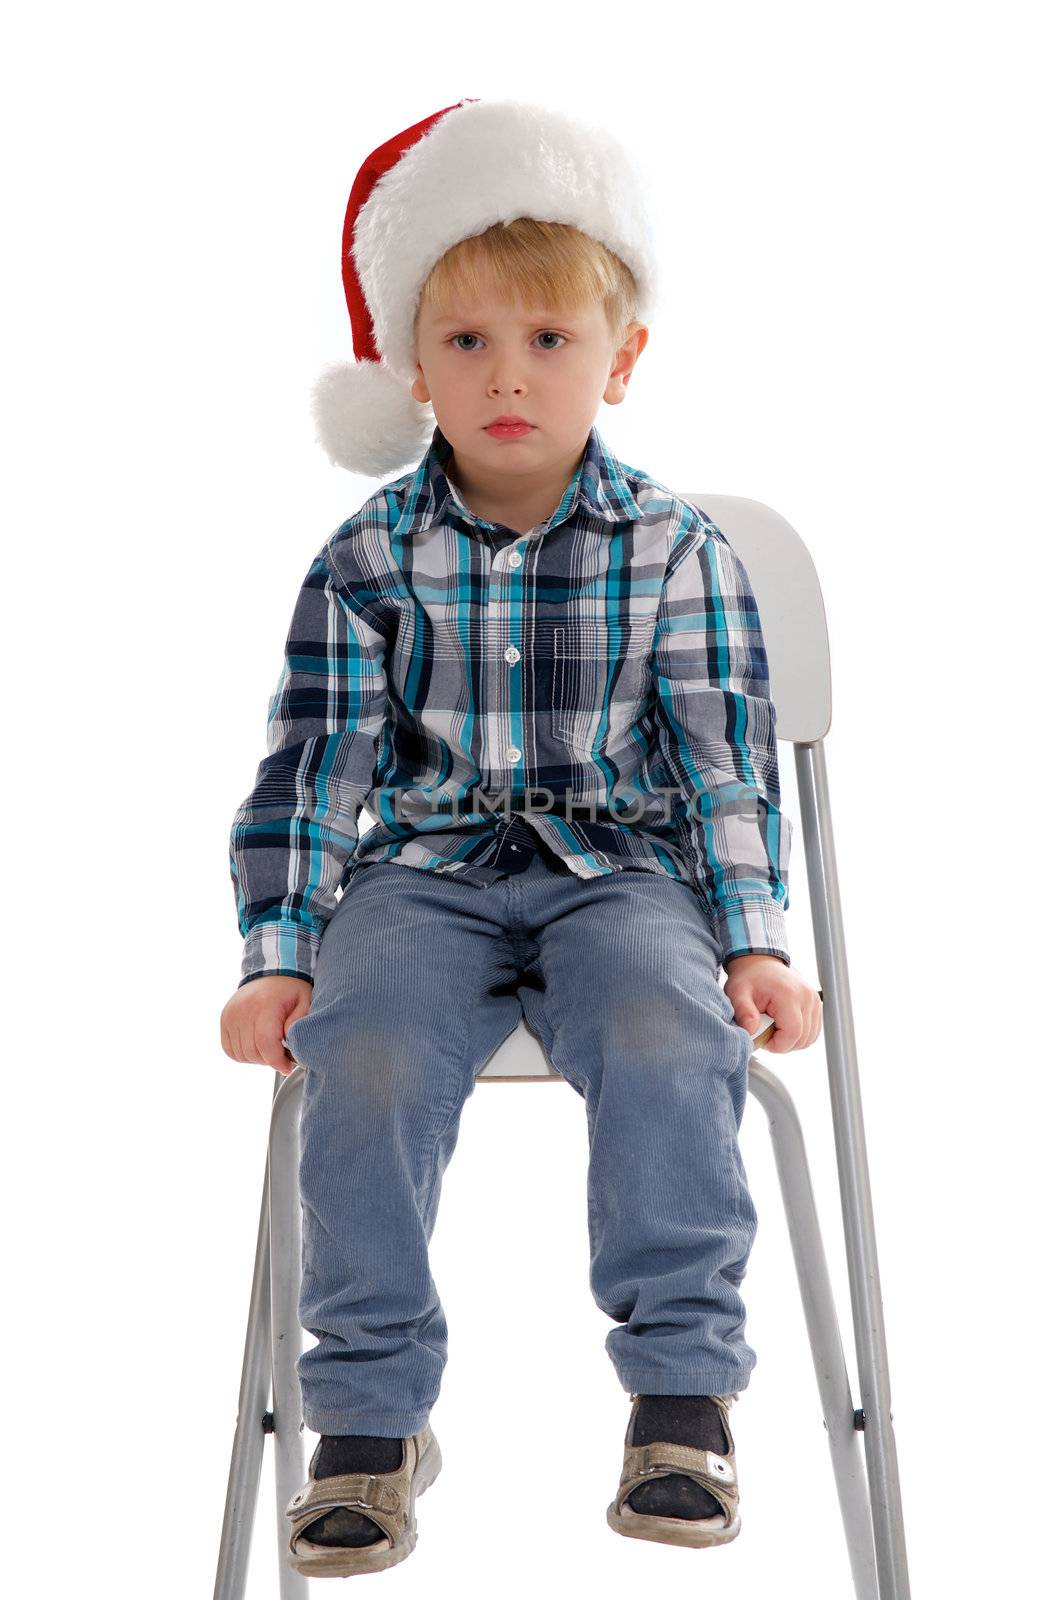 Little Boy with Santa Hat Sitting on Chair and Asking "I'm not Santa?" 